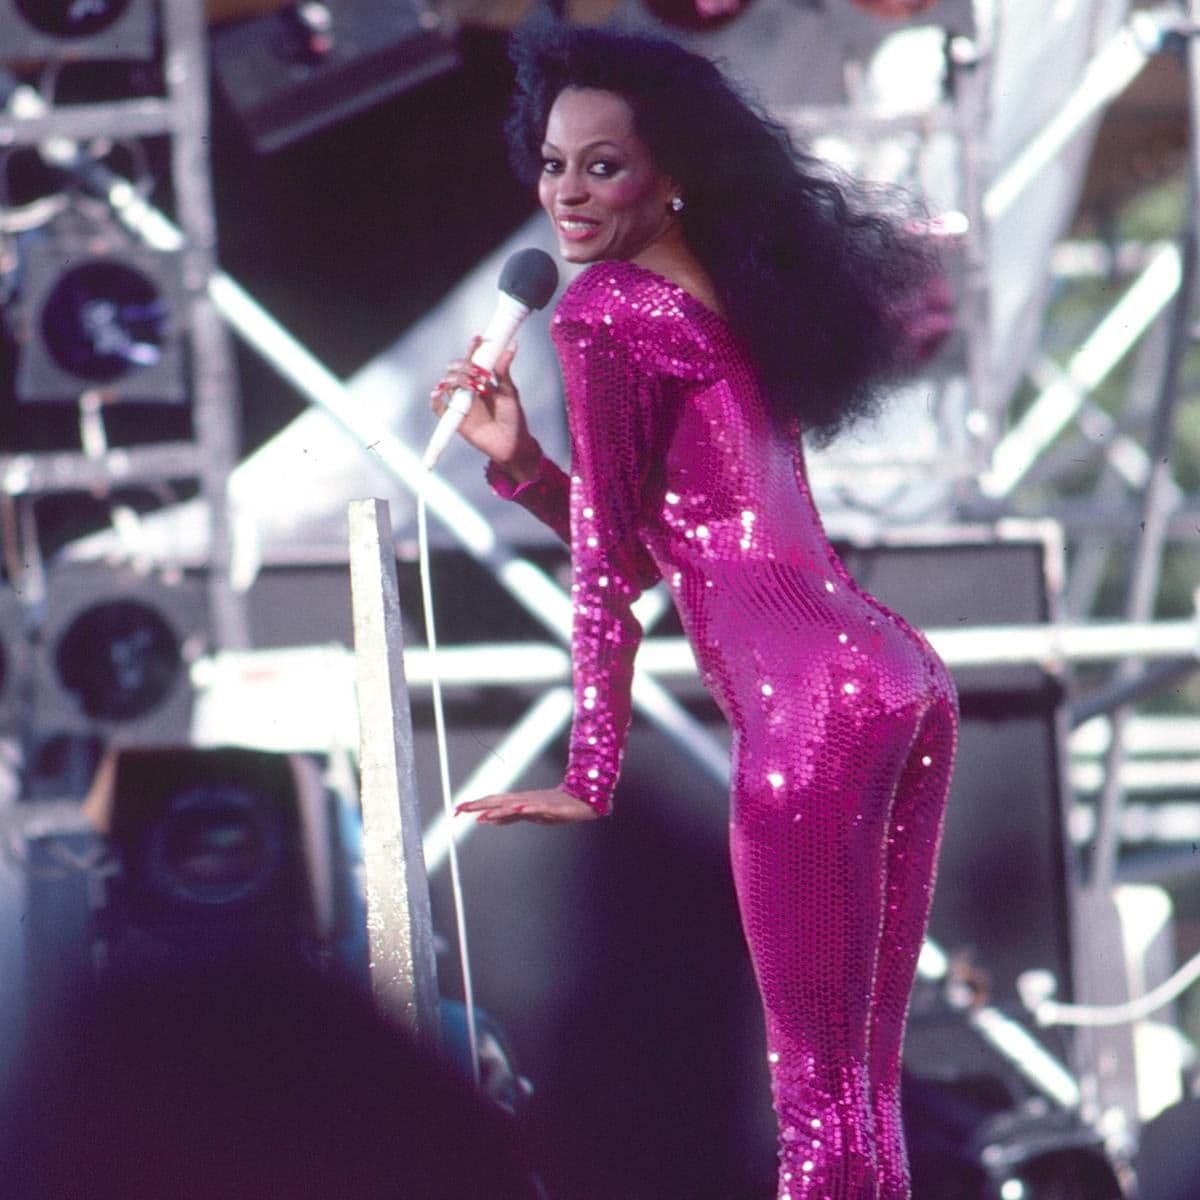 Diana Ross performs in Central Park in 1983